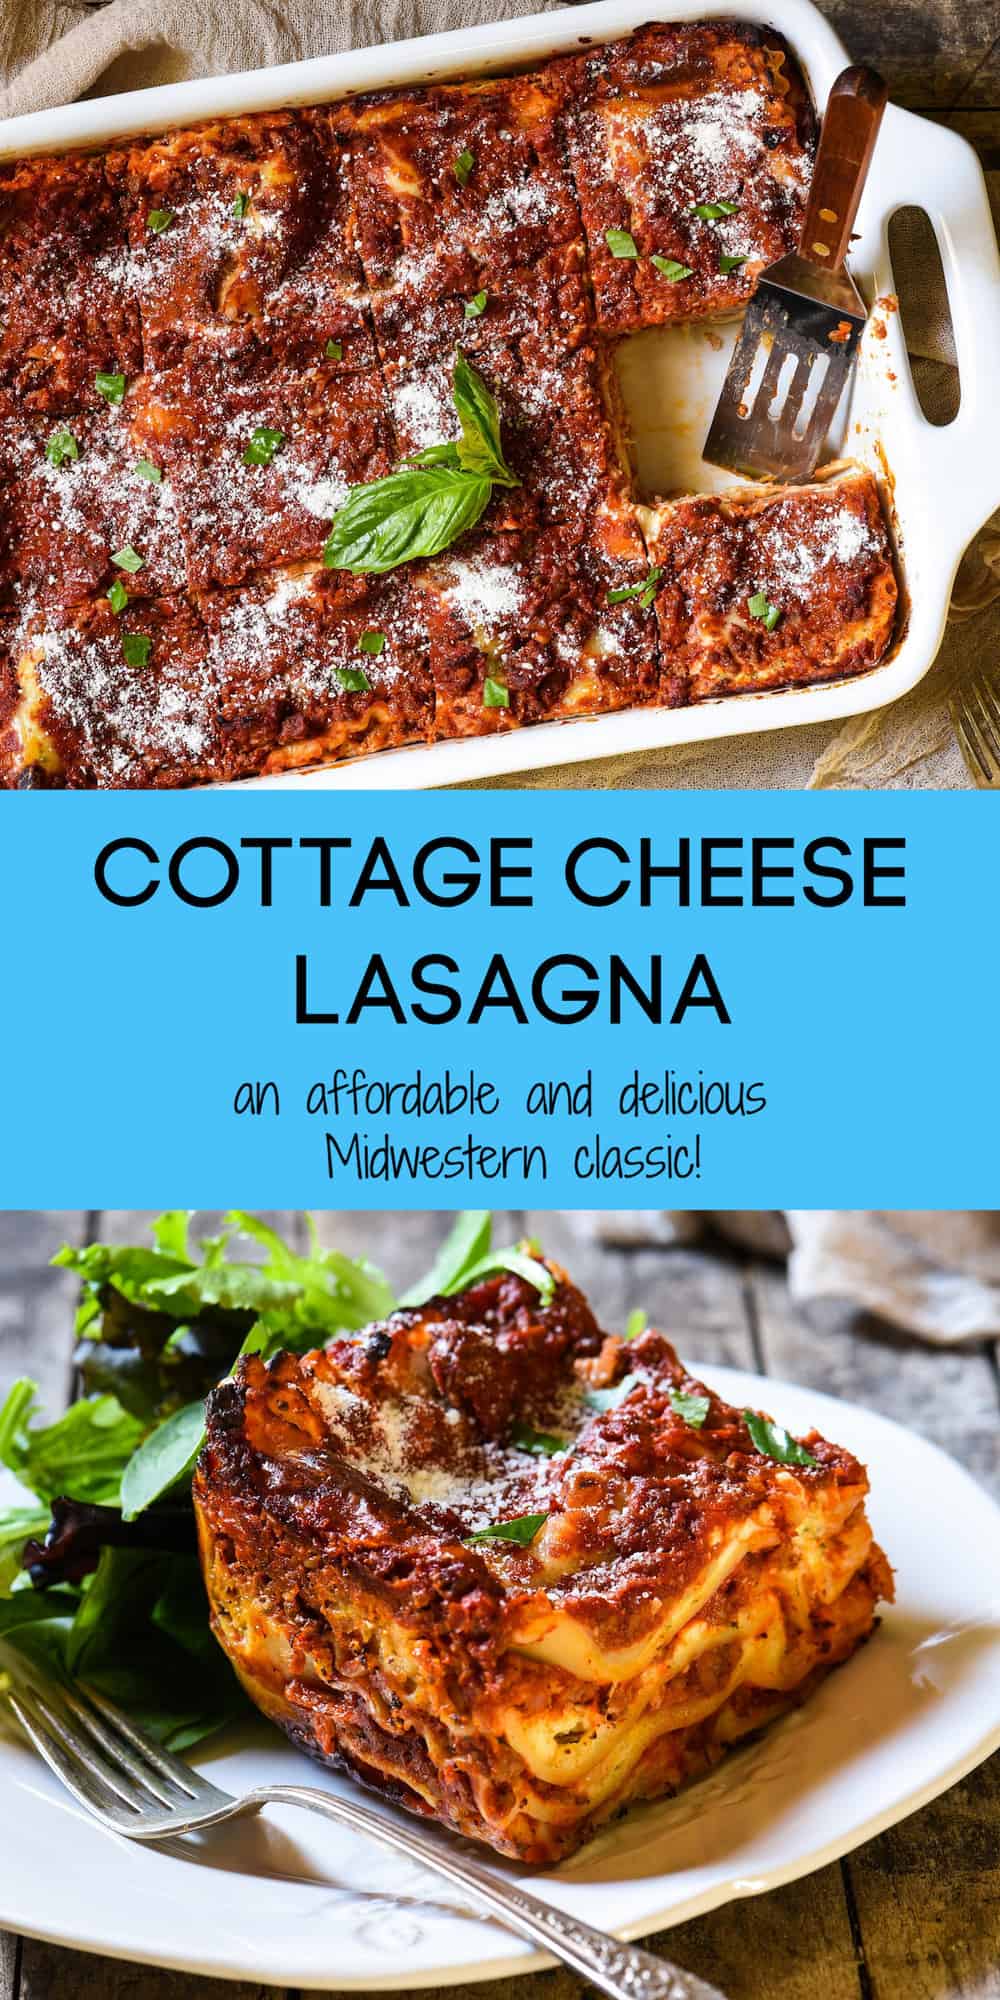 Collage of images of lasagna with cottage cheese with overlay COTTAGE CHEESE LASAGNA an affordable and delicious Midwestern classic!